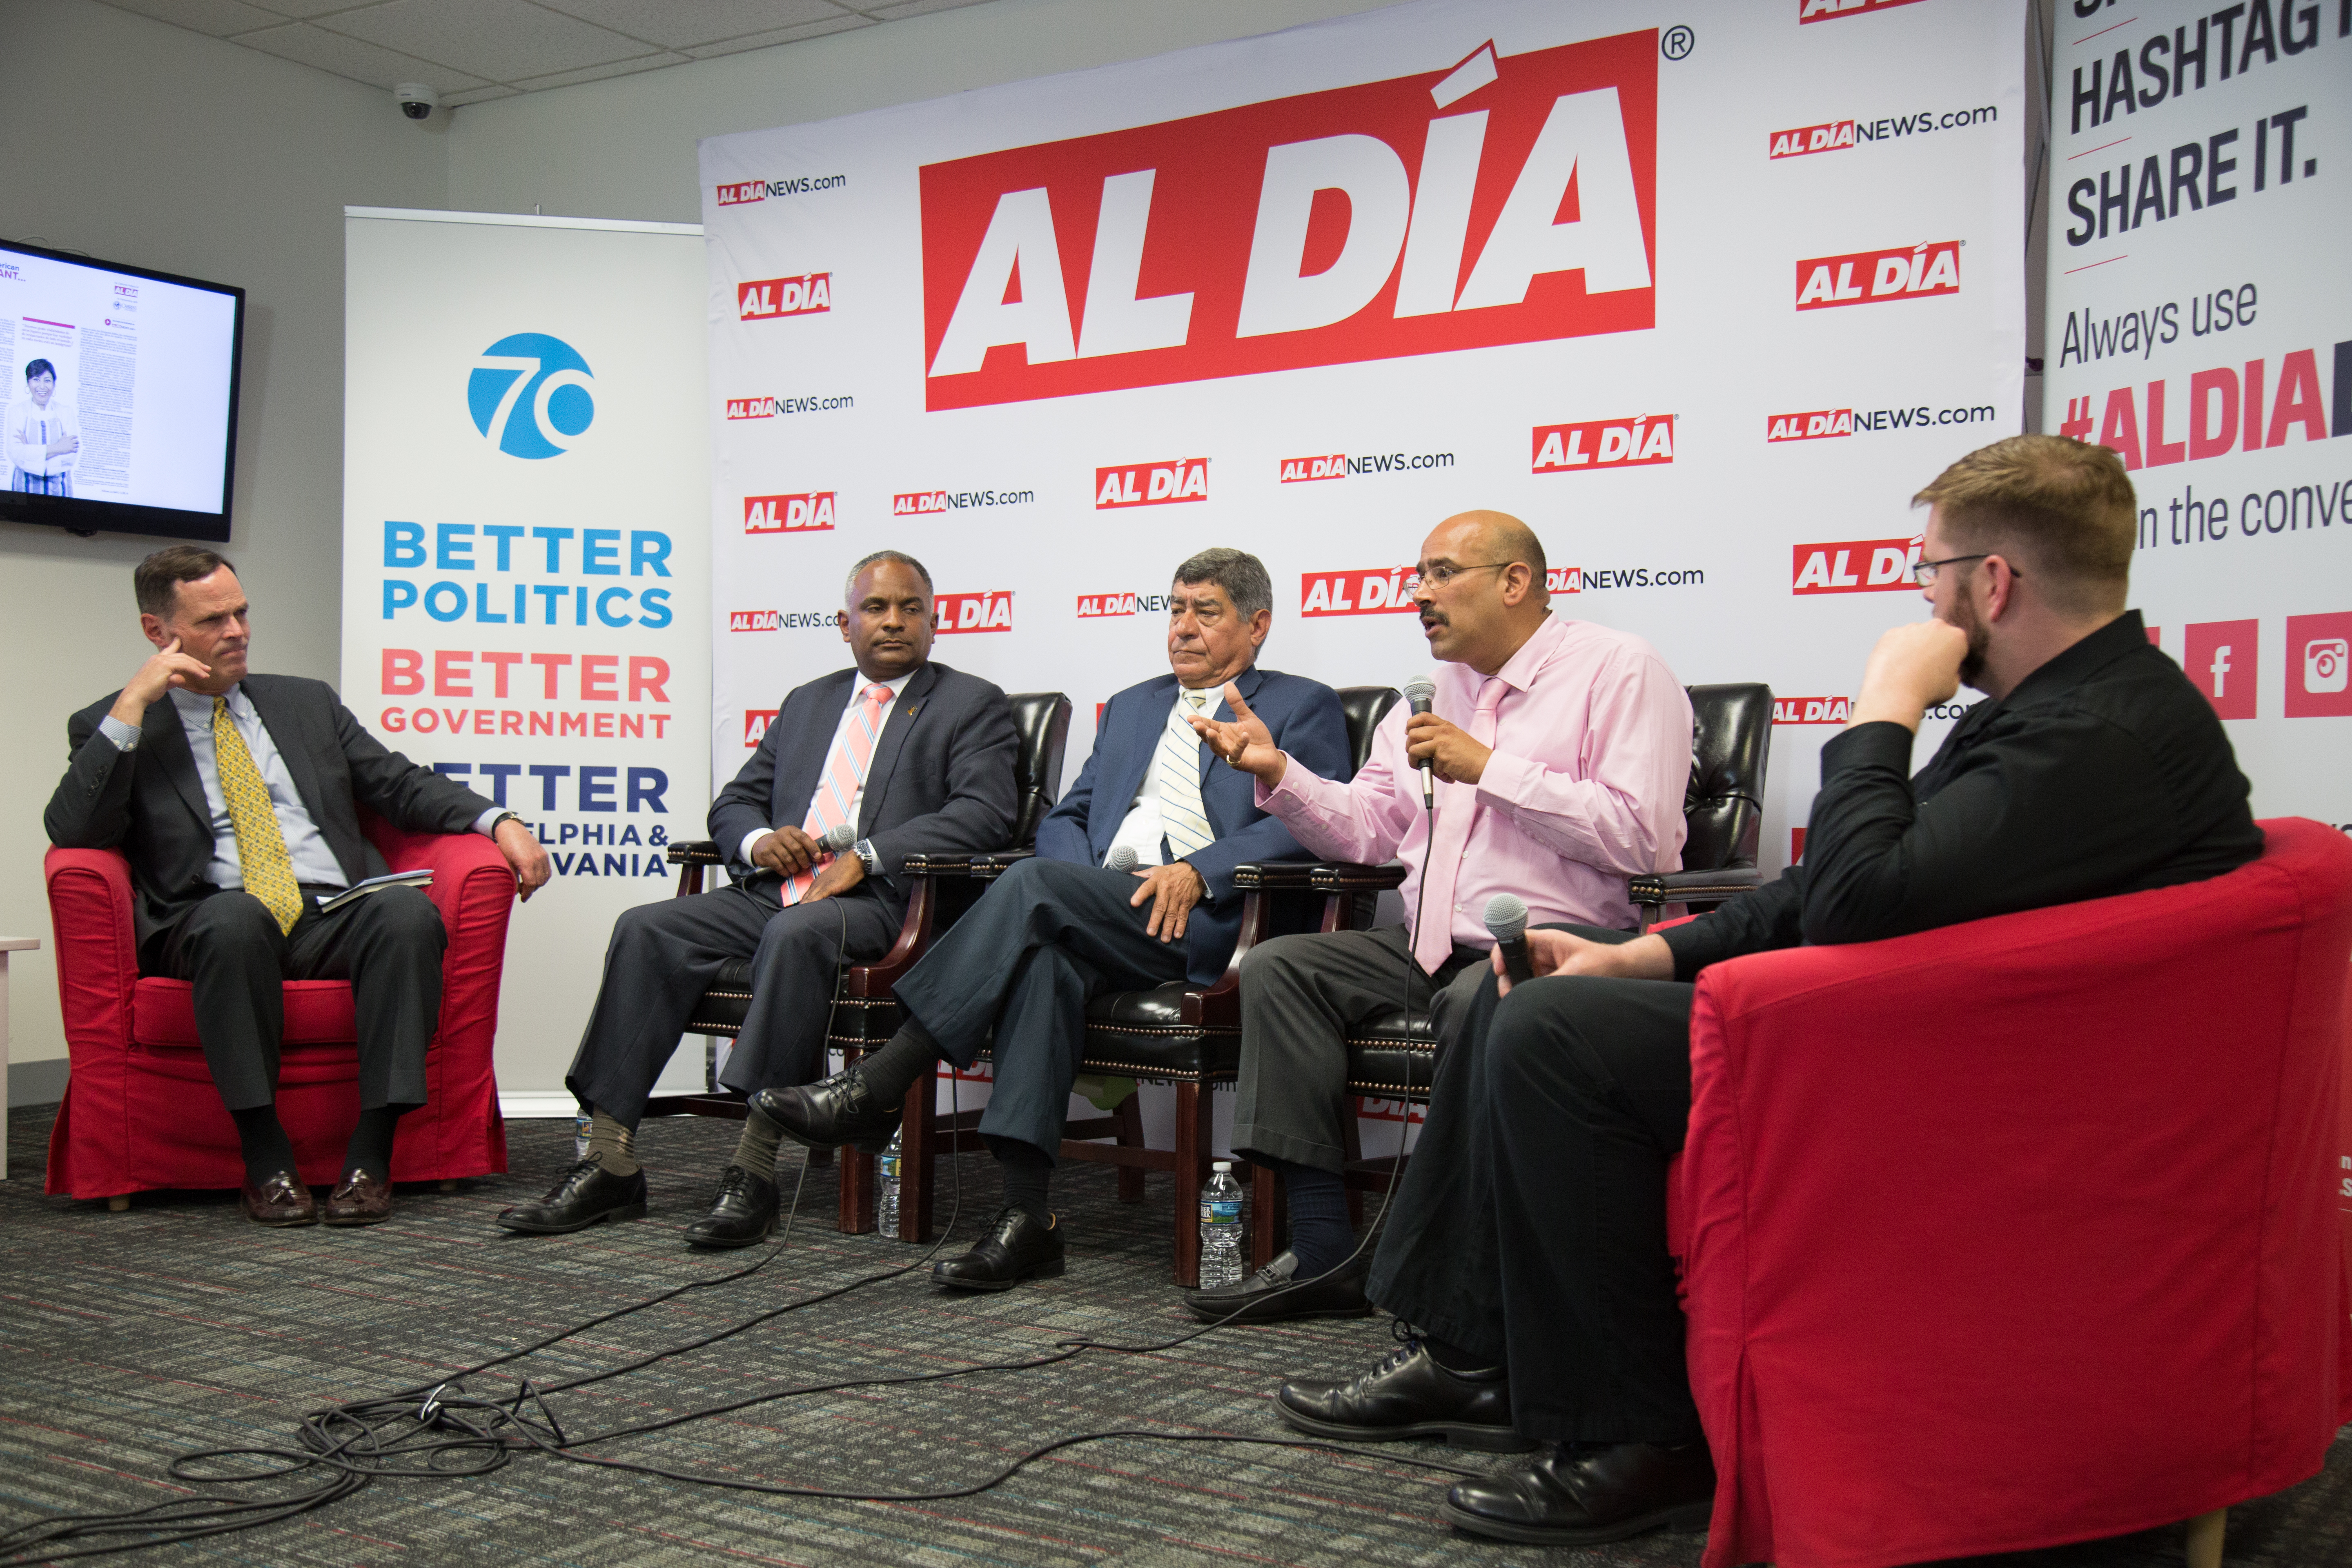 Committee of 70 and AL DÍA News partnered to host a conversation with the Democratic candidates for Pennsylvania's 197th District. Samantha Laub / AL DÍA News